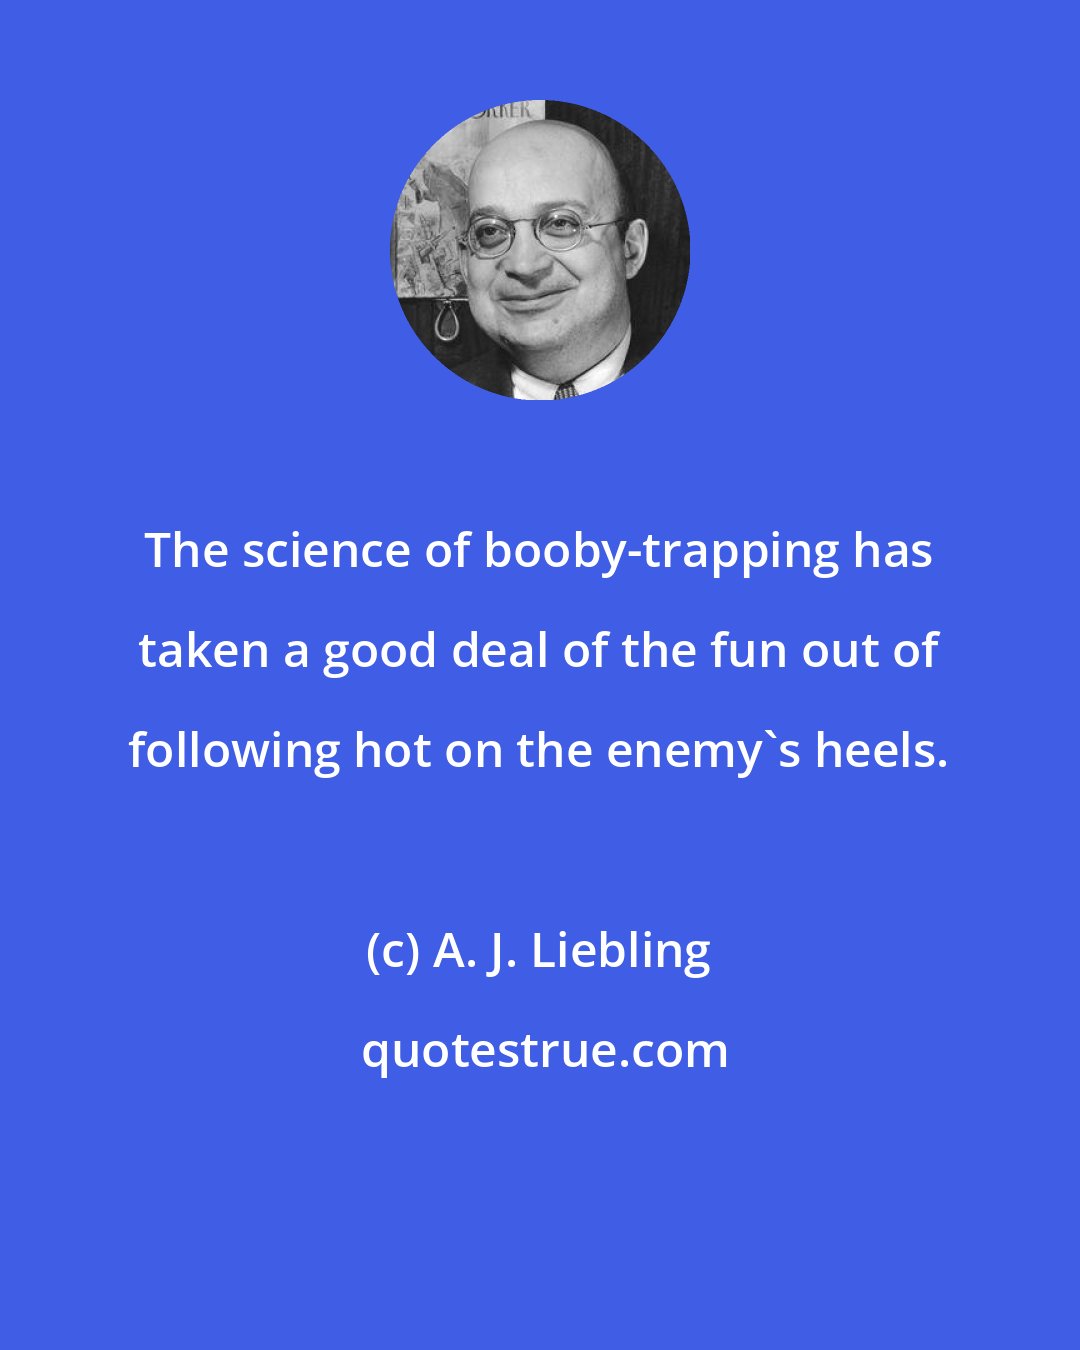 A. J. Liebling: The science of booby-trapping has taken a good deal of the fun out of following hot on the enemy's heels.